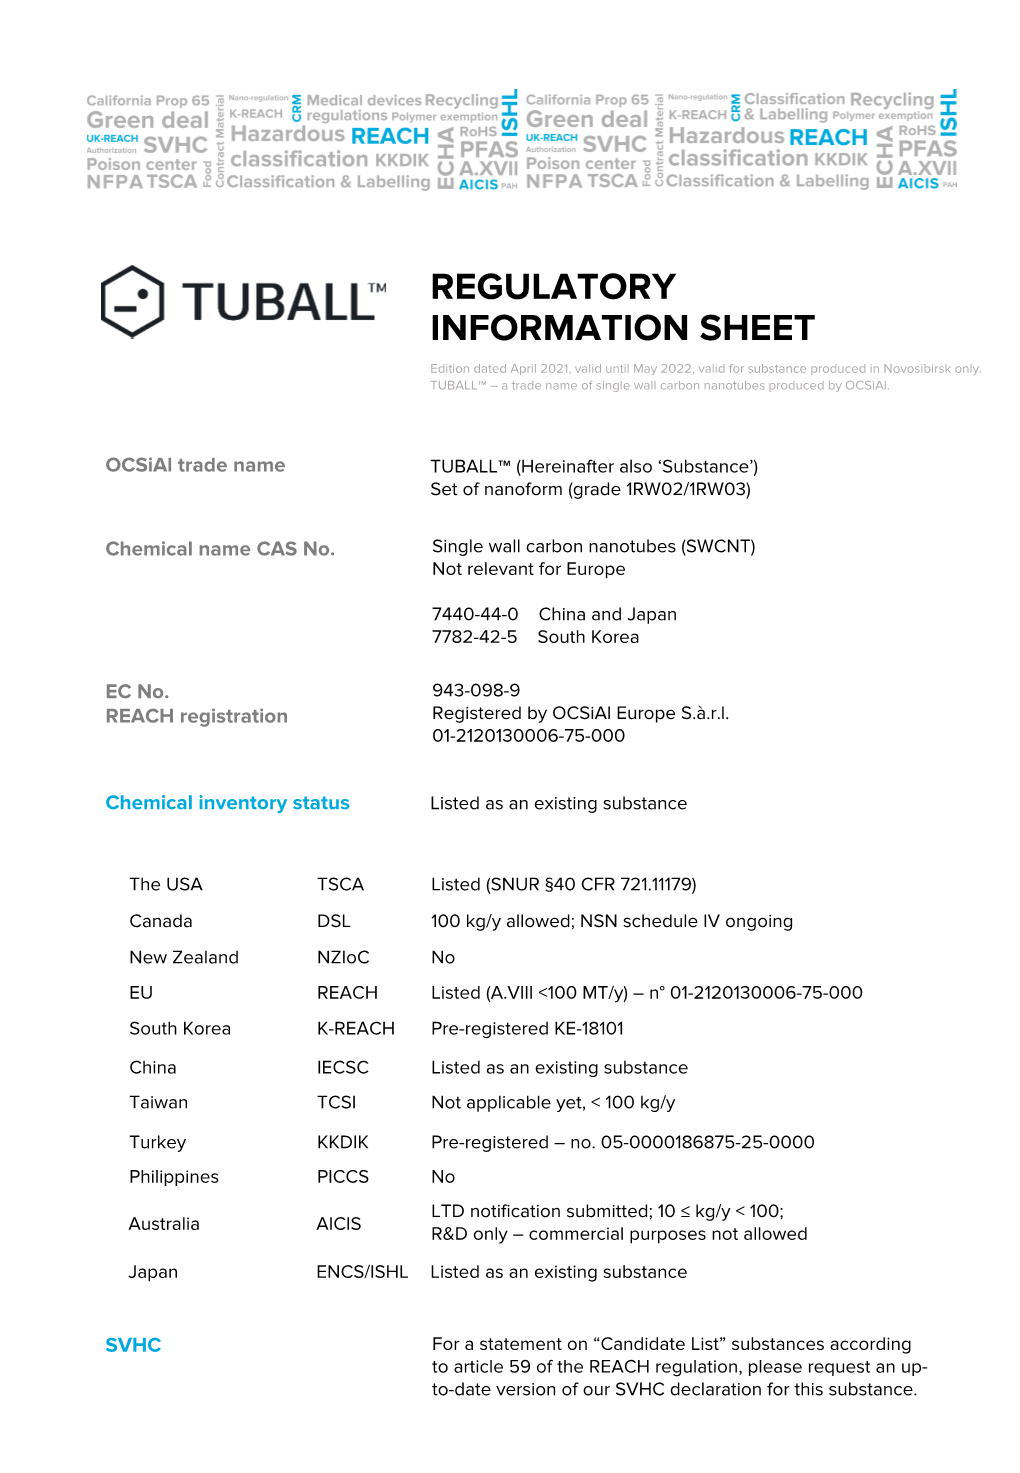 REGULATORY INFORMATION SHEET Edition Dated April 2021, Valid Until May 2022, Valid for Substance Produced in Novosibirsk Only